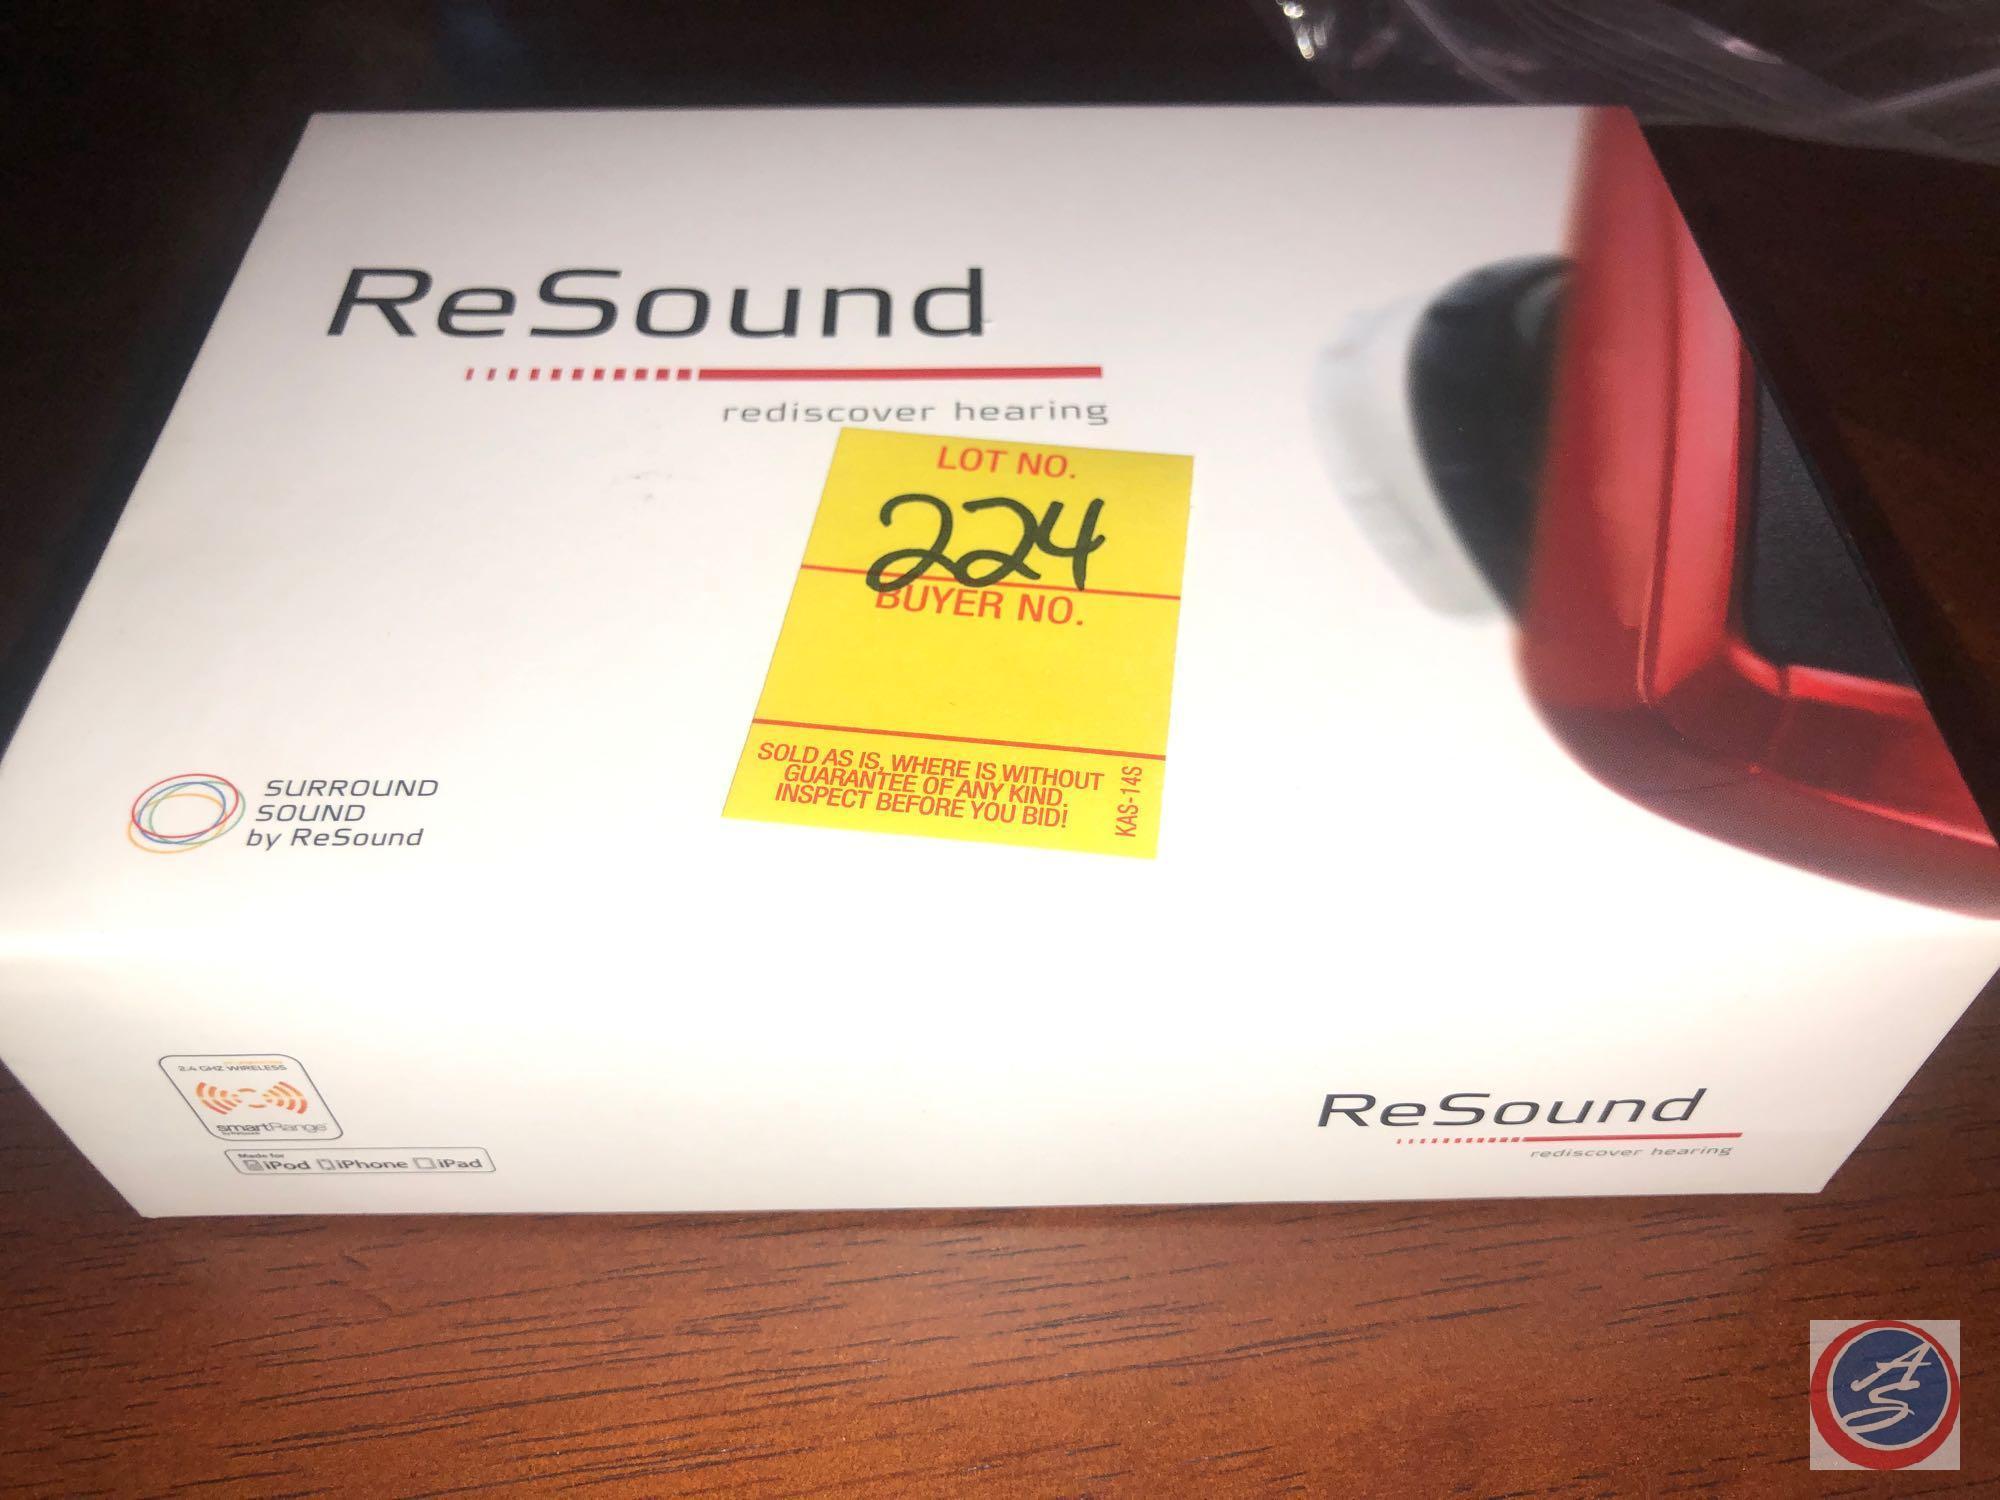 ReSound Receiver-In-Ear Hearing Instrument in Original Box [[USED]]